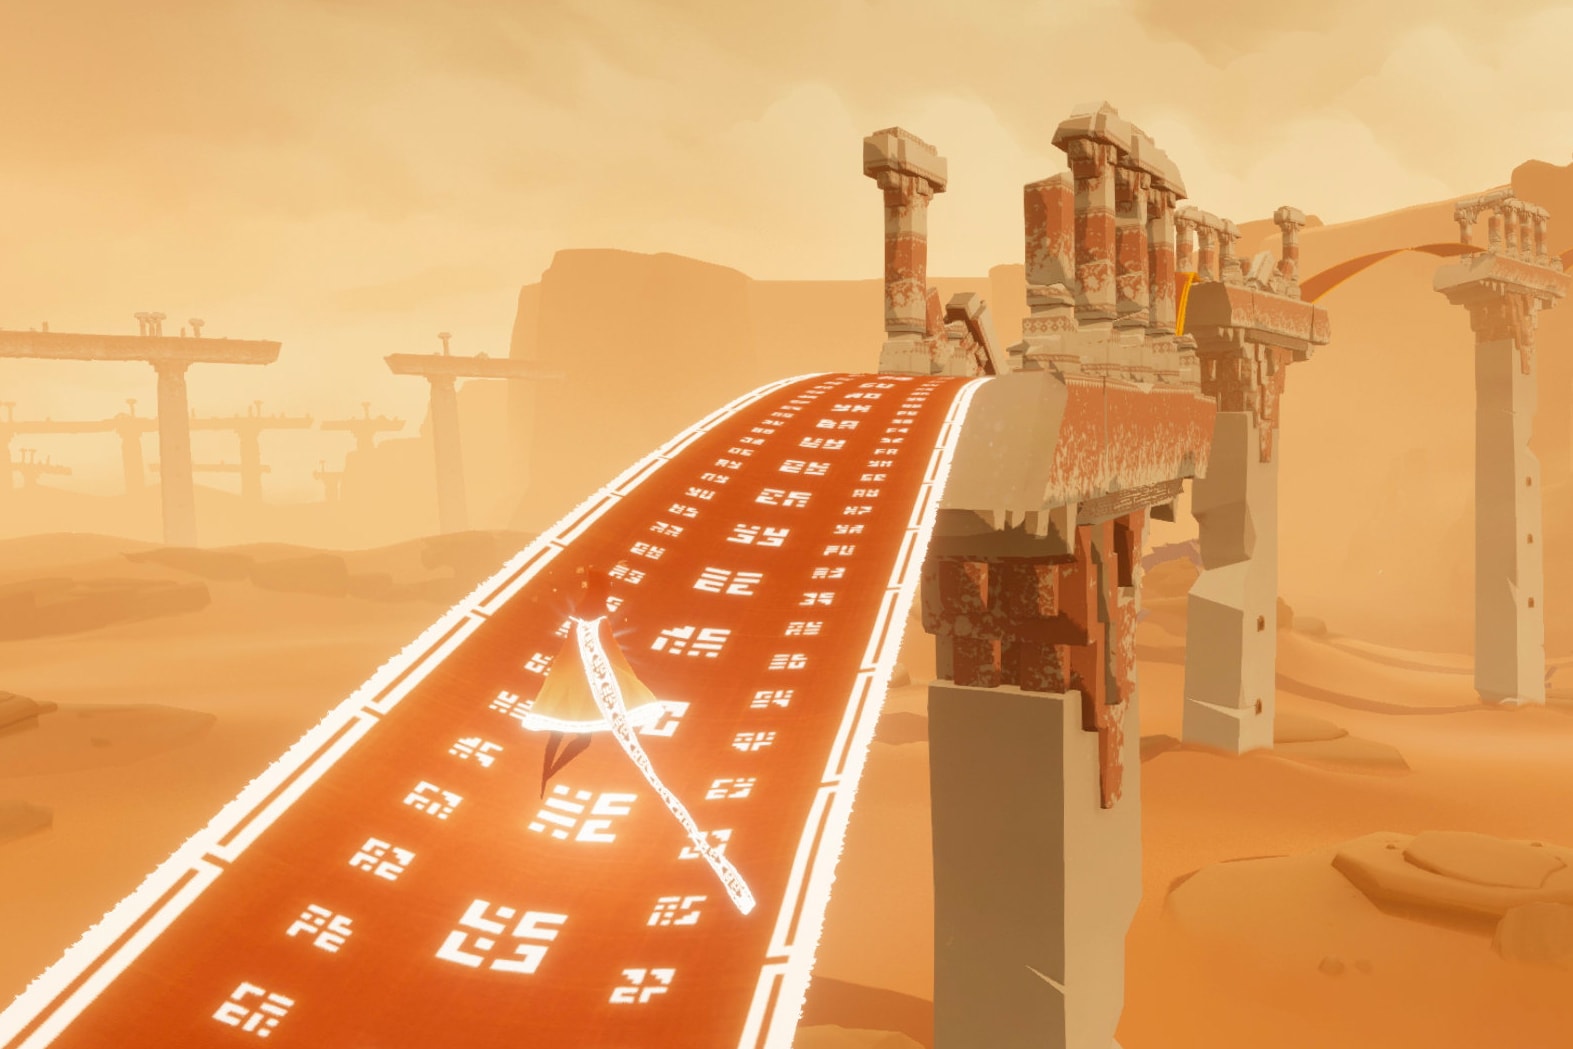 thatgamecompany indie game journey steam epic games store exclusive adventure pc